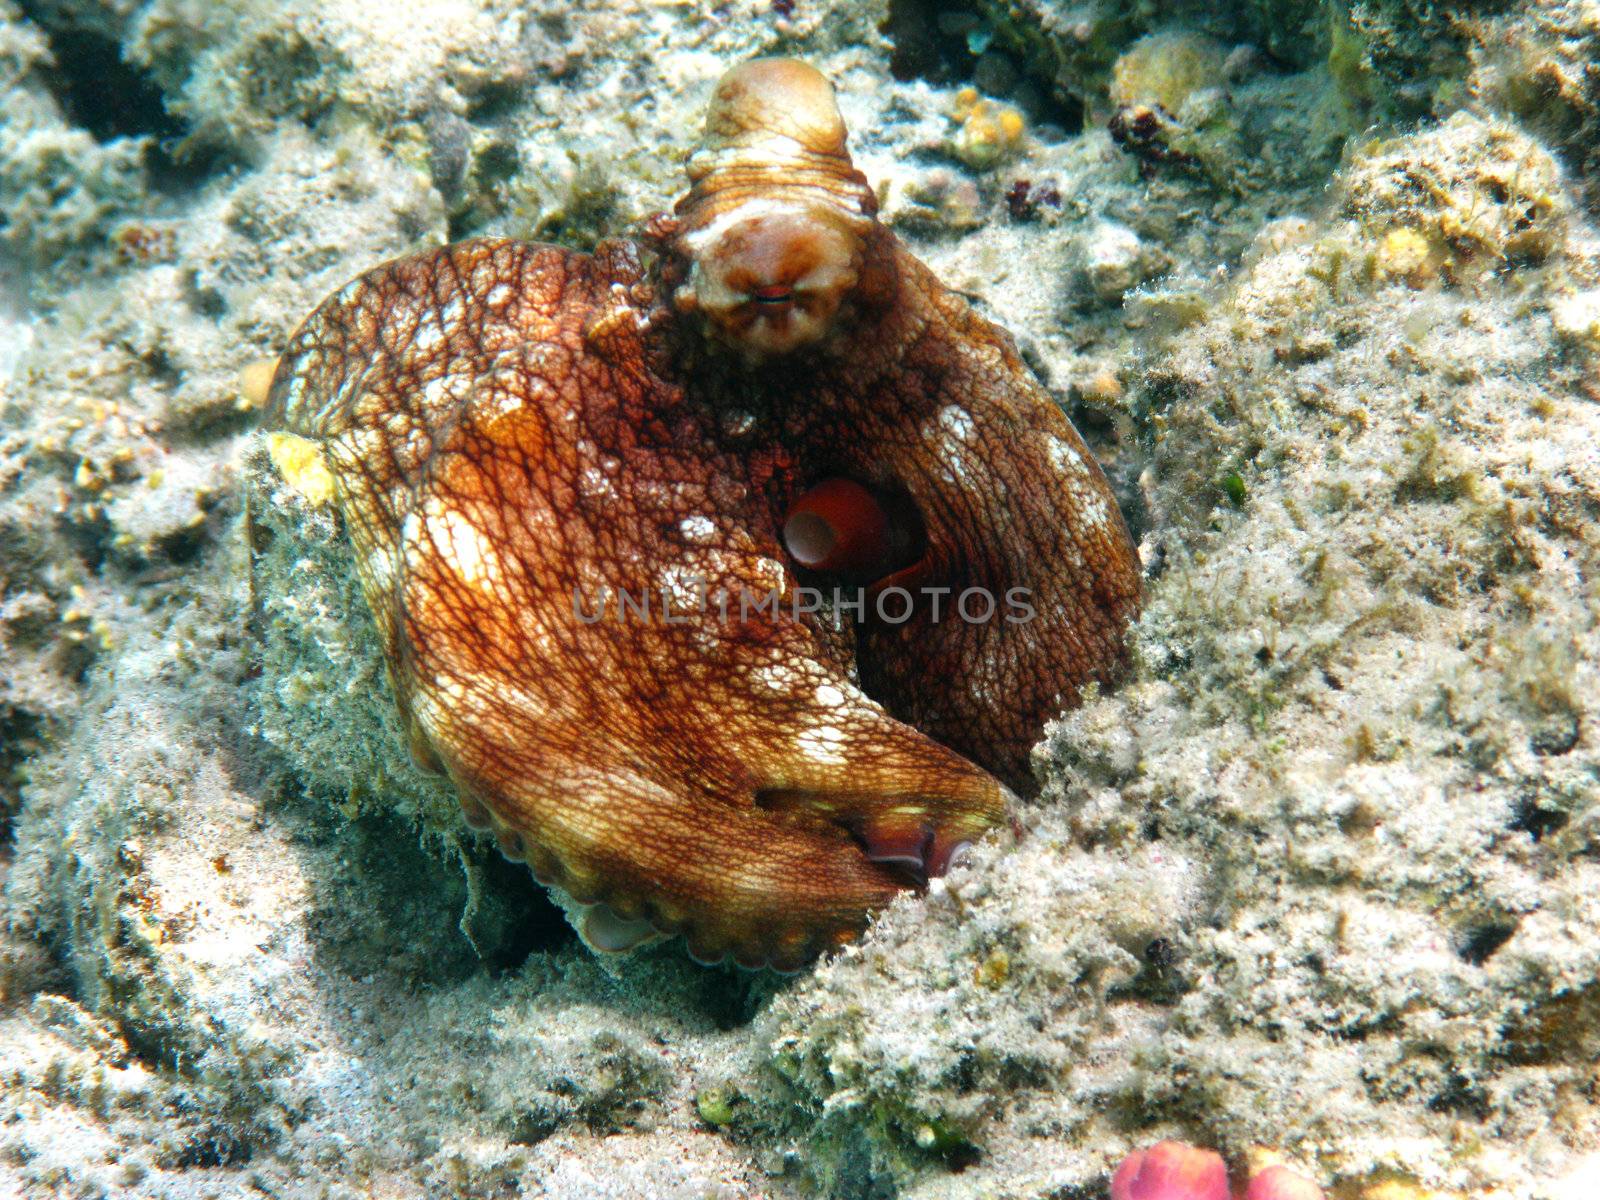 Octopus in Red sea, Marsa Alam, Egypt